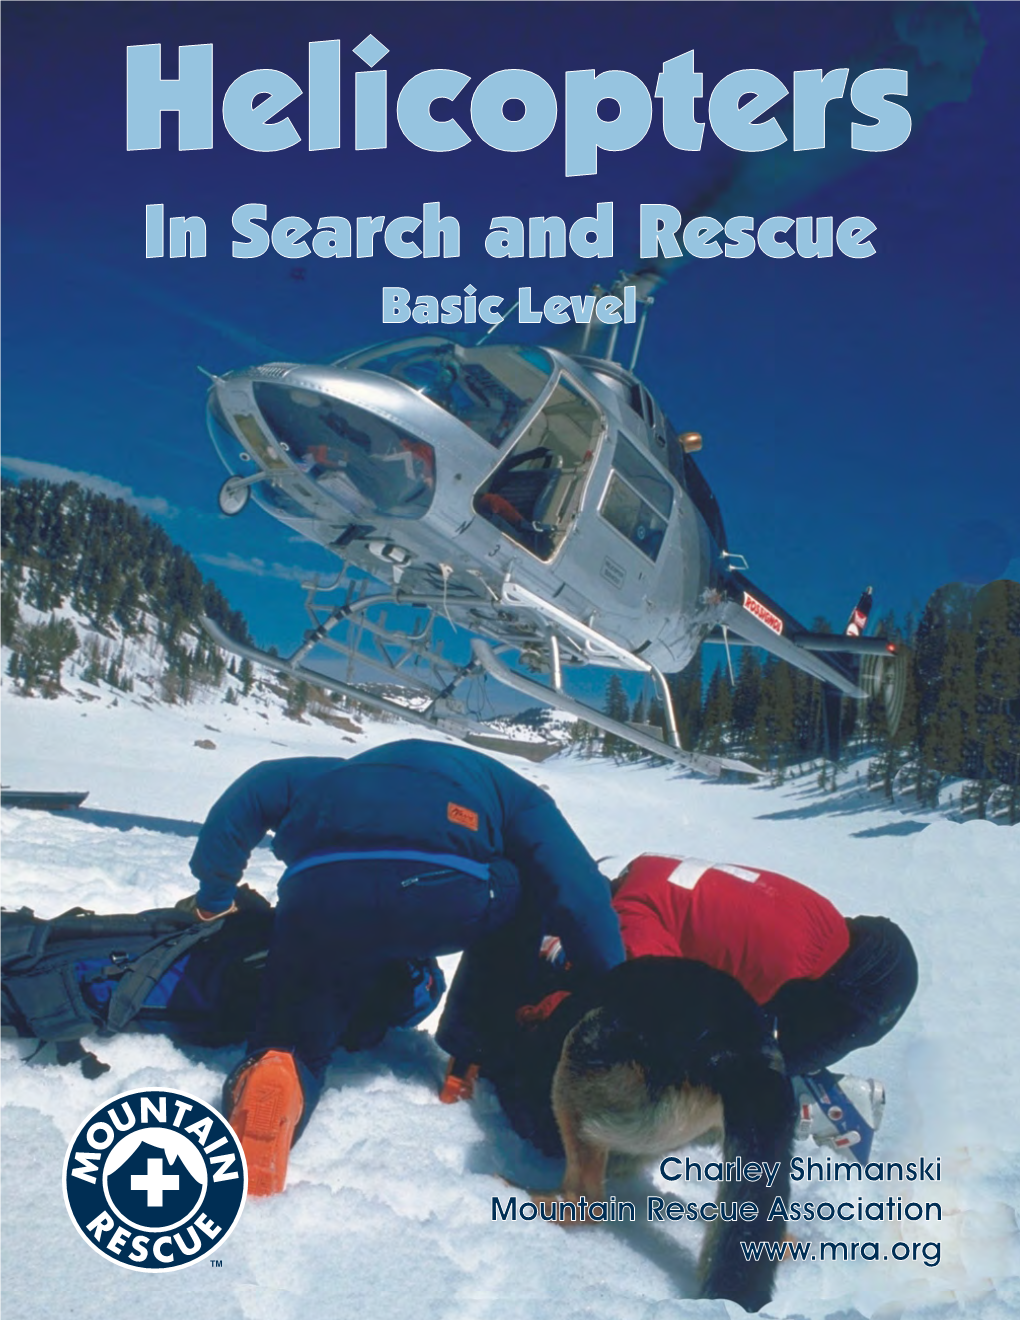 Helicopters in Search and Rescue Basic Level